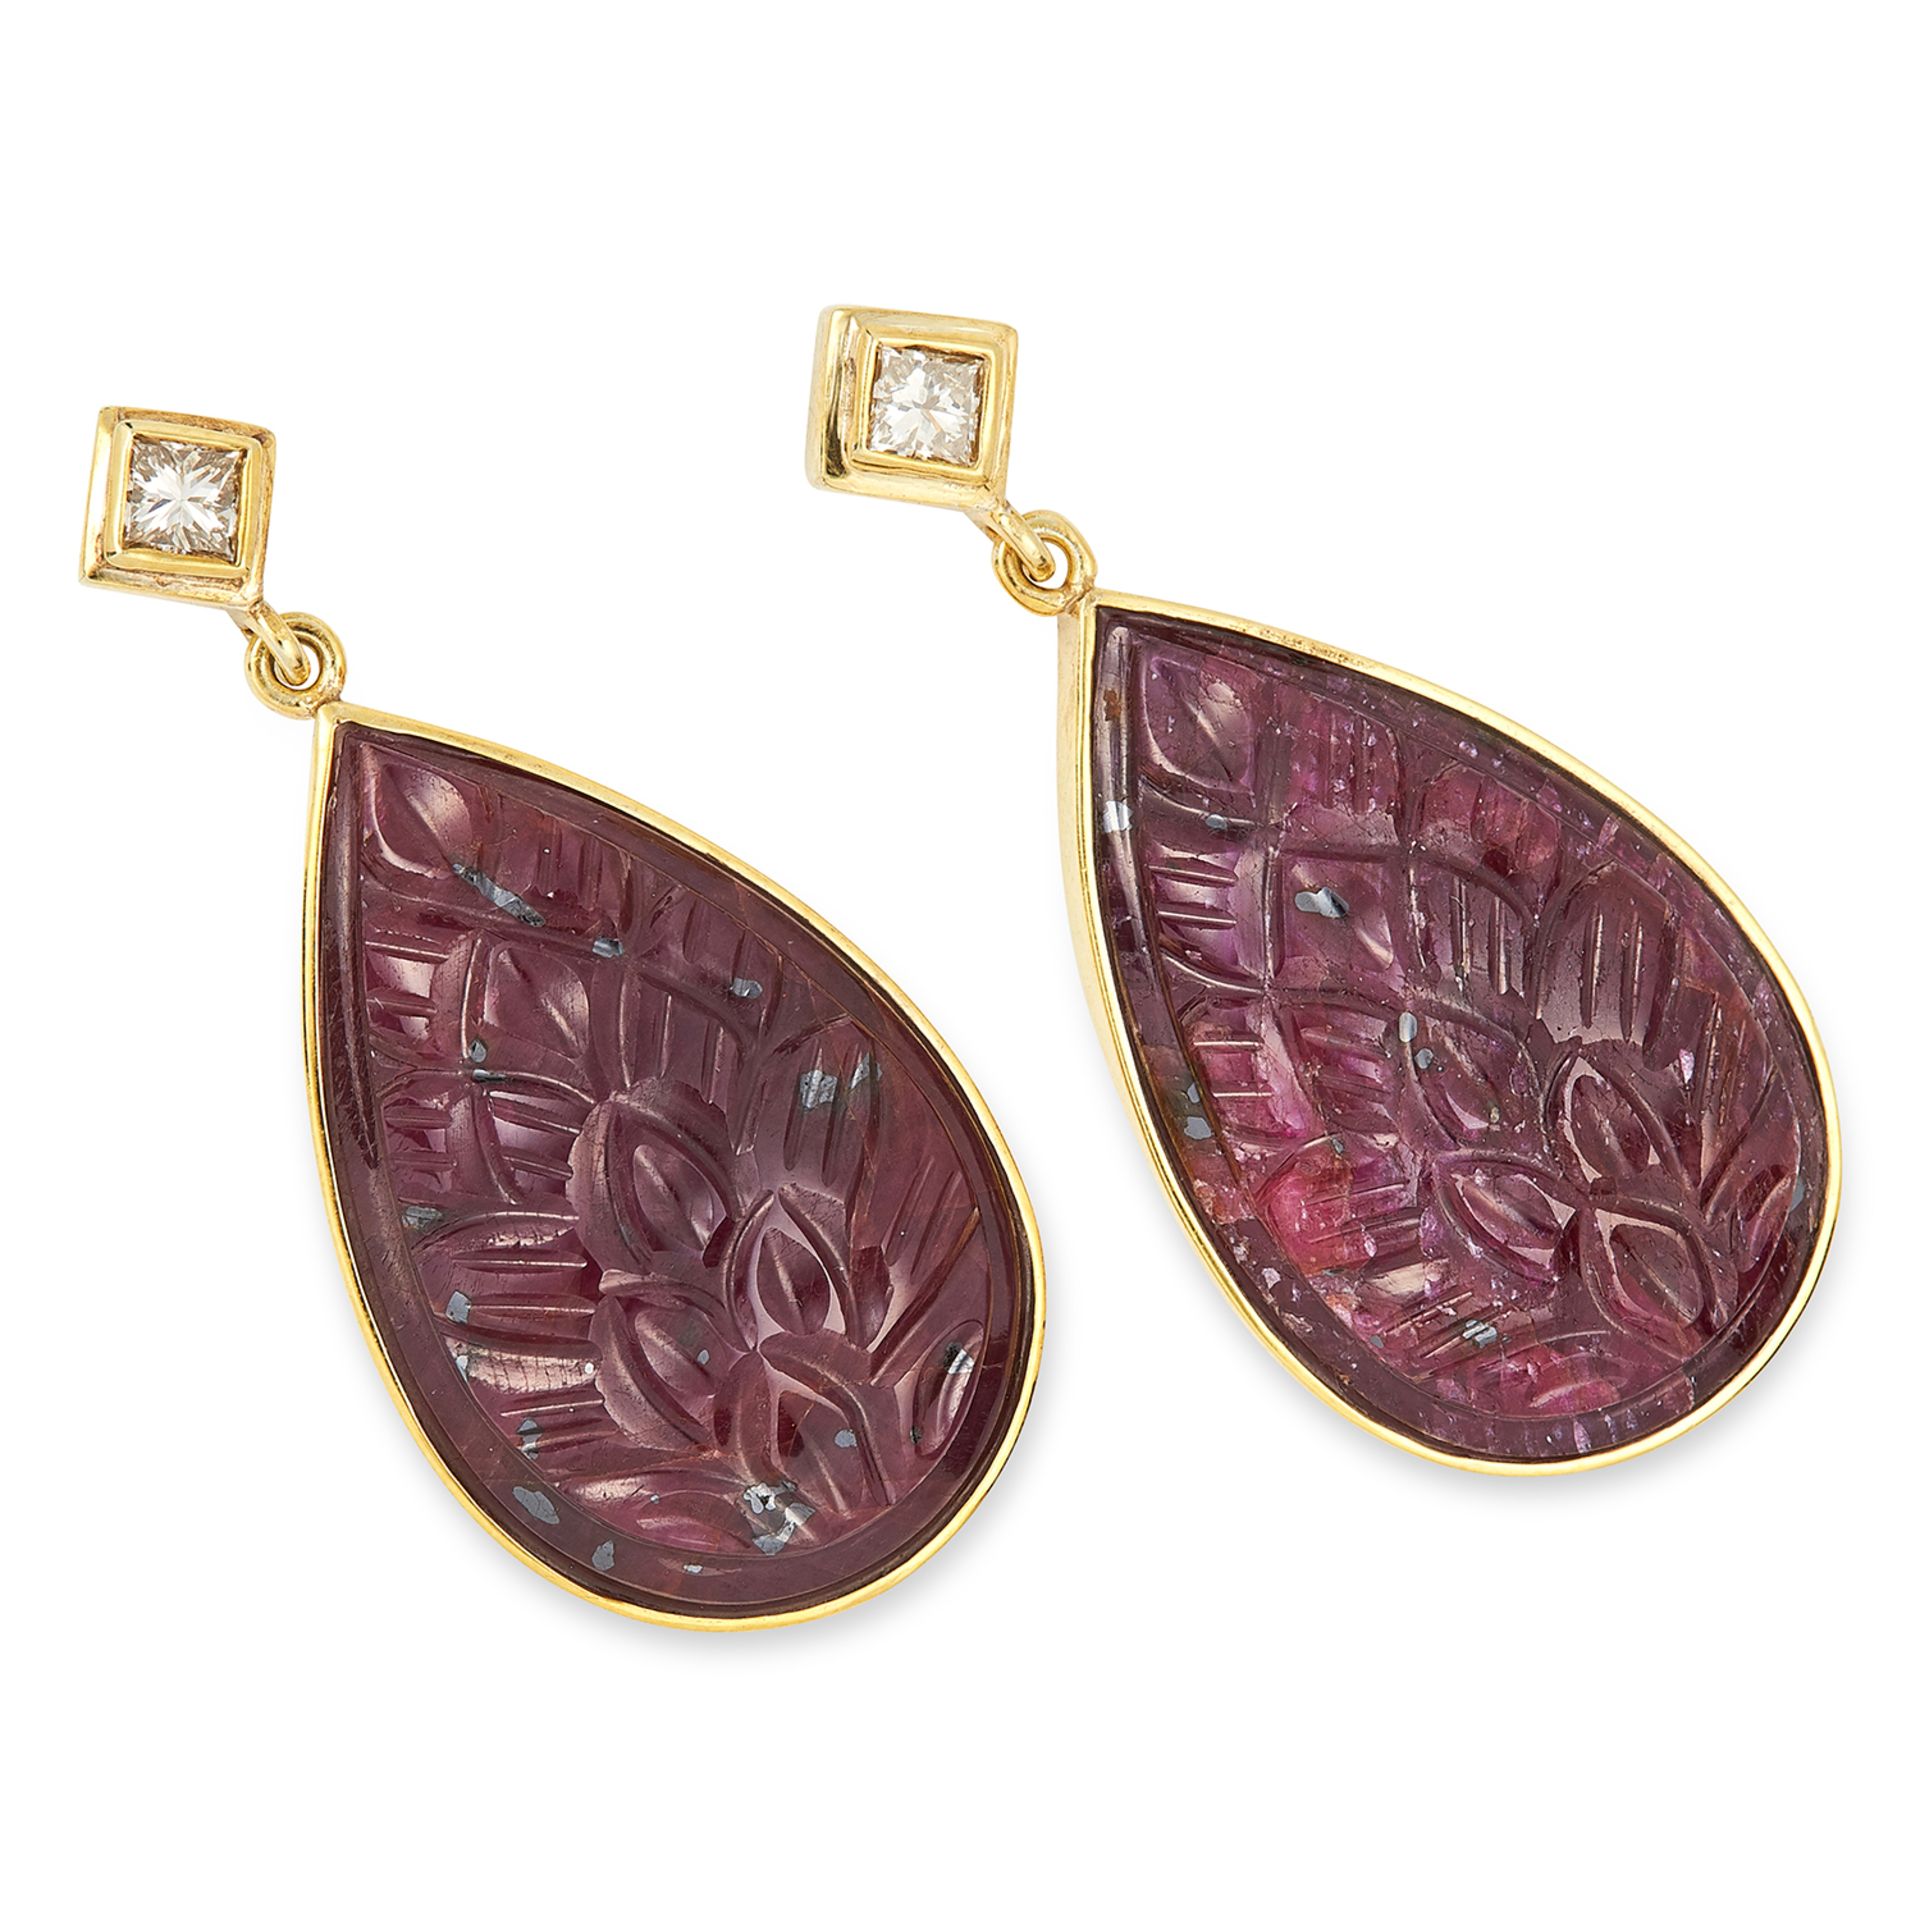 CARVED RUBY AND DIAMOND EARRINGS each set with a princess cut diamond and a Mughal carved ruby drop,